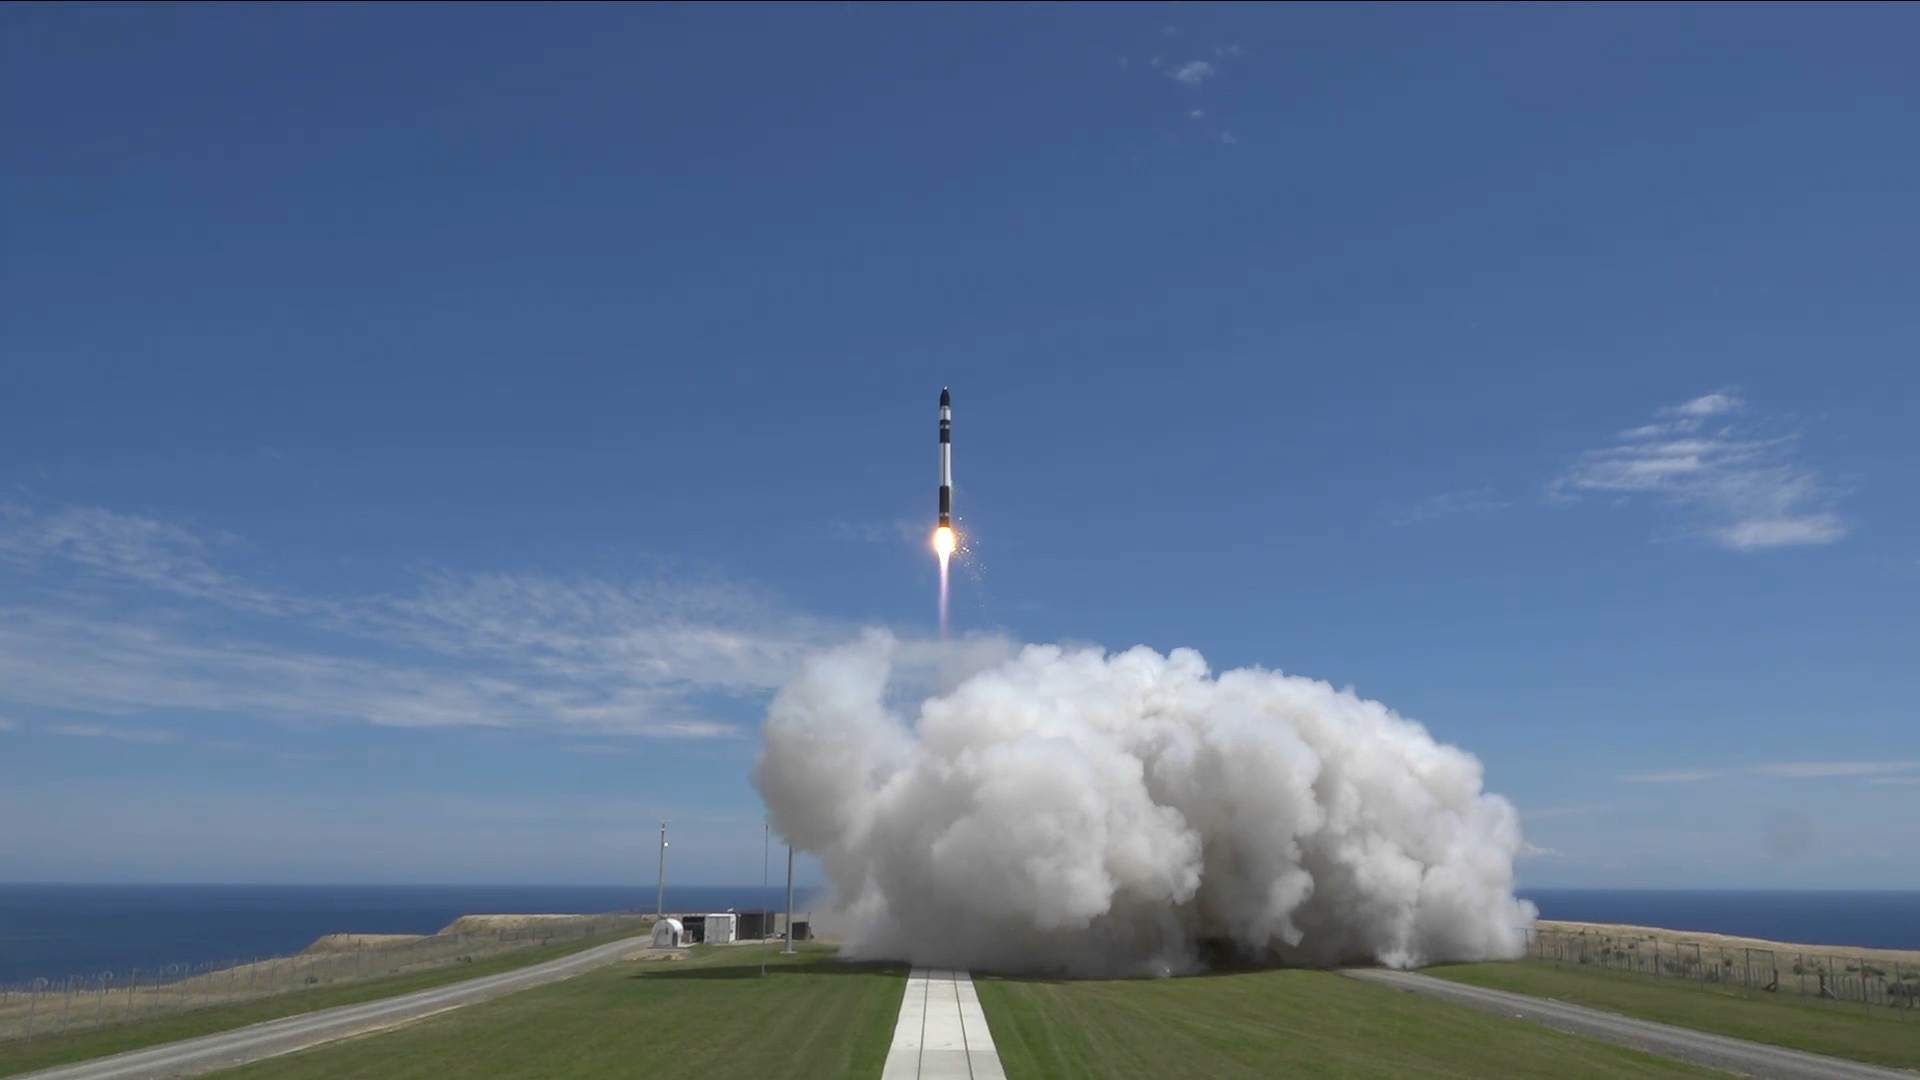 Electron lifted off from Rocket Lab’s Launch Complex 1 on the Mahia Peninsula in New Zealand. Source: Rocket Lab